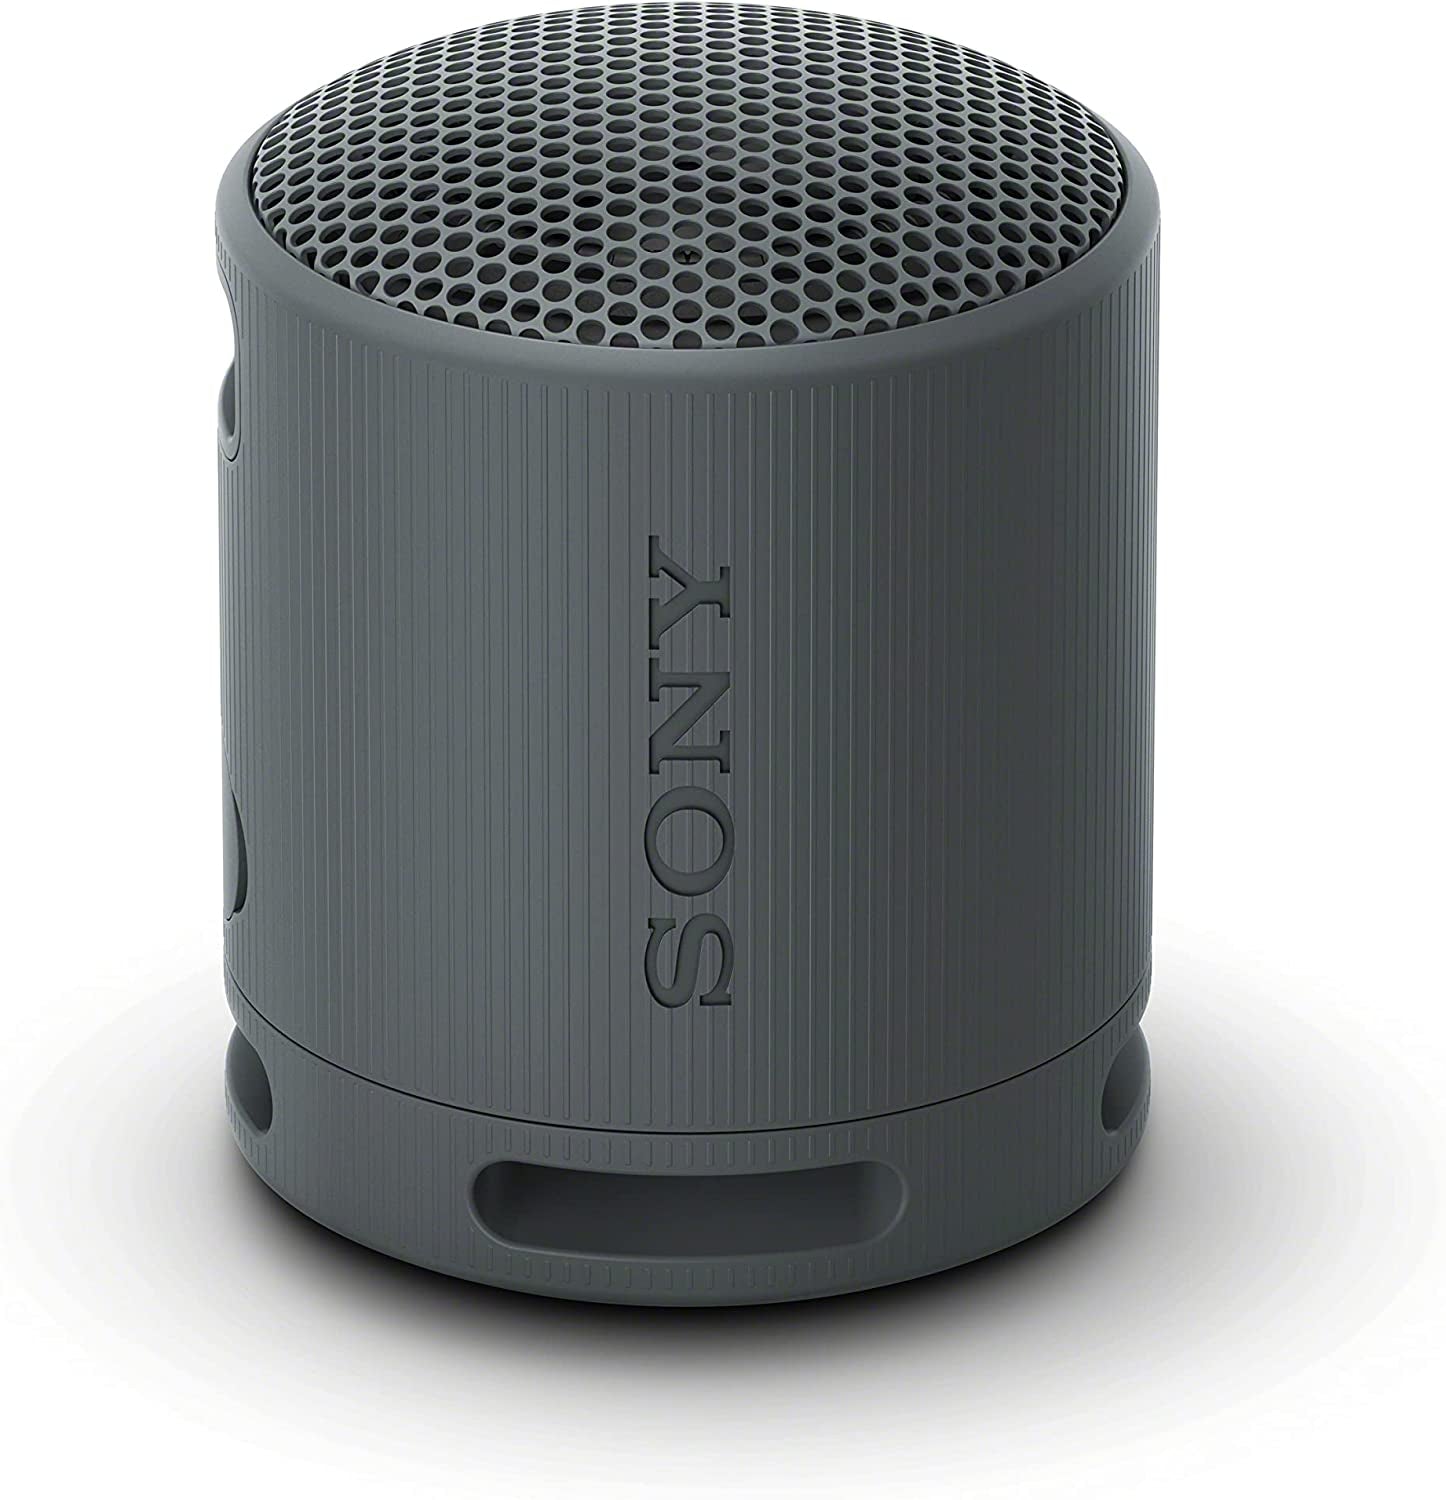 SRS-XB100 SONY Wireless Bluetooth Portable Speaker with IP67 Waterproof & Dustproof, Long Battery Life, Versatile Strap, and Hands-Free Calling - Black